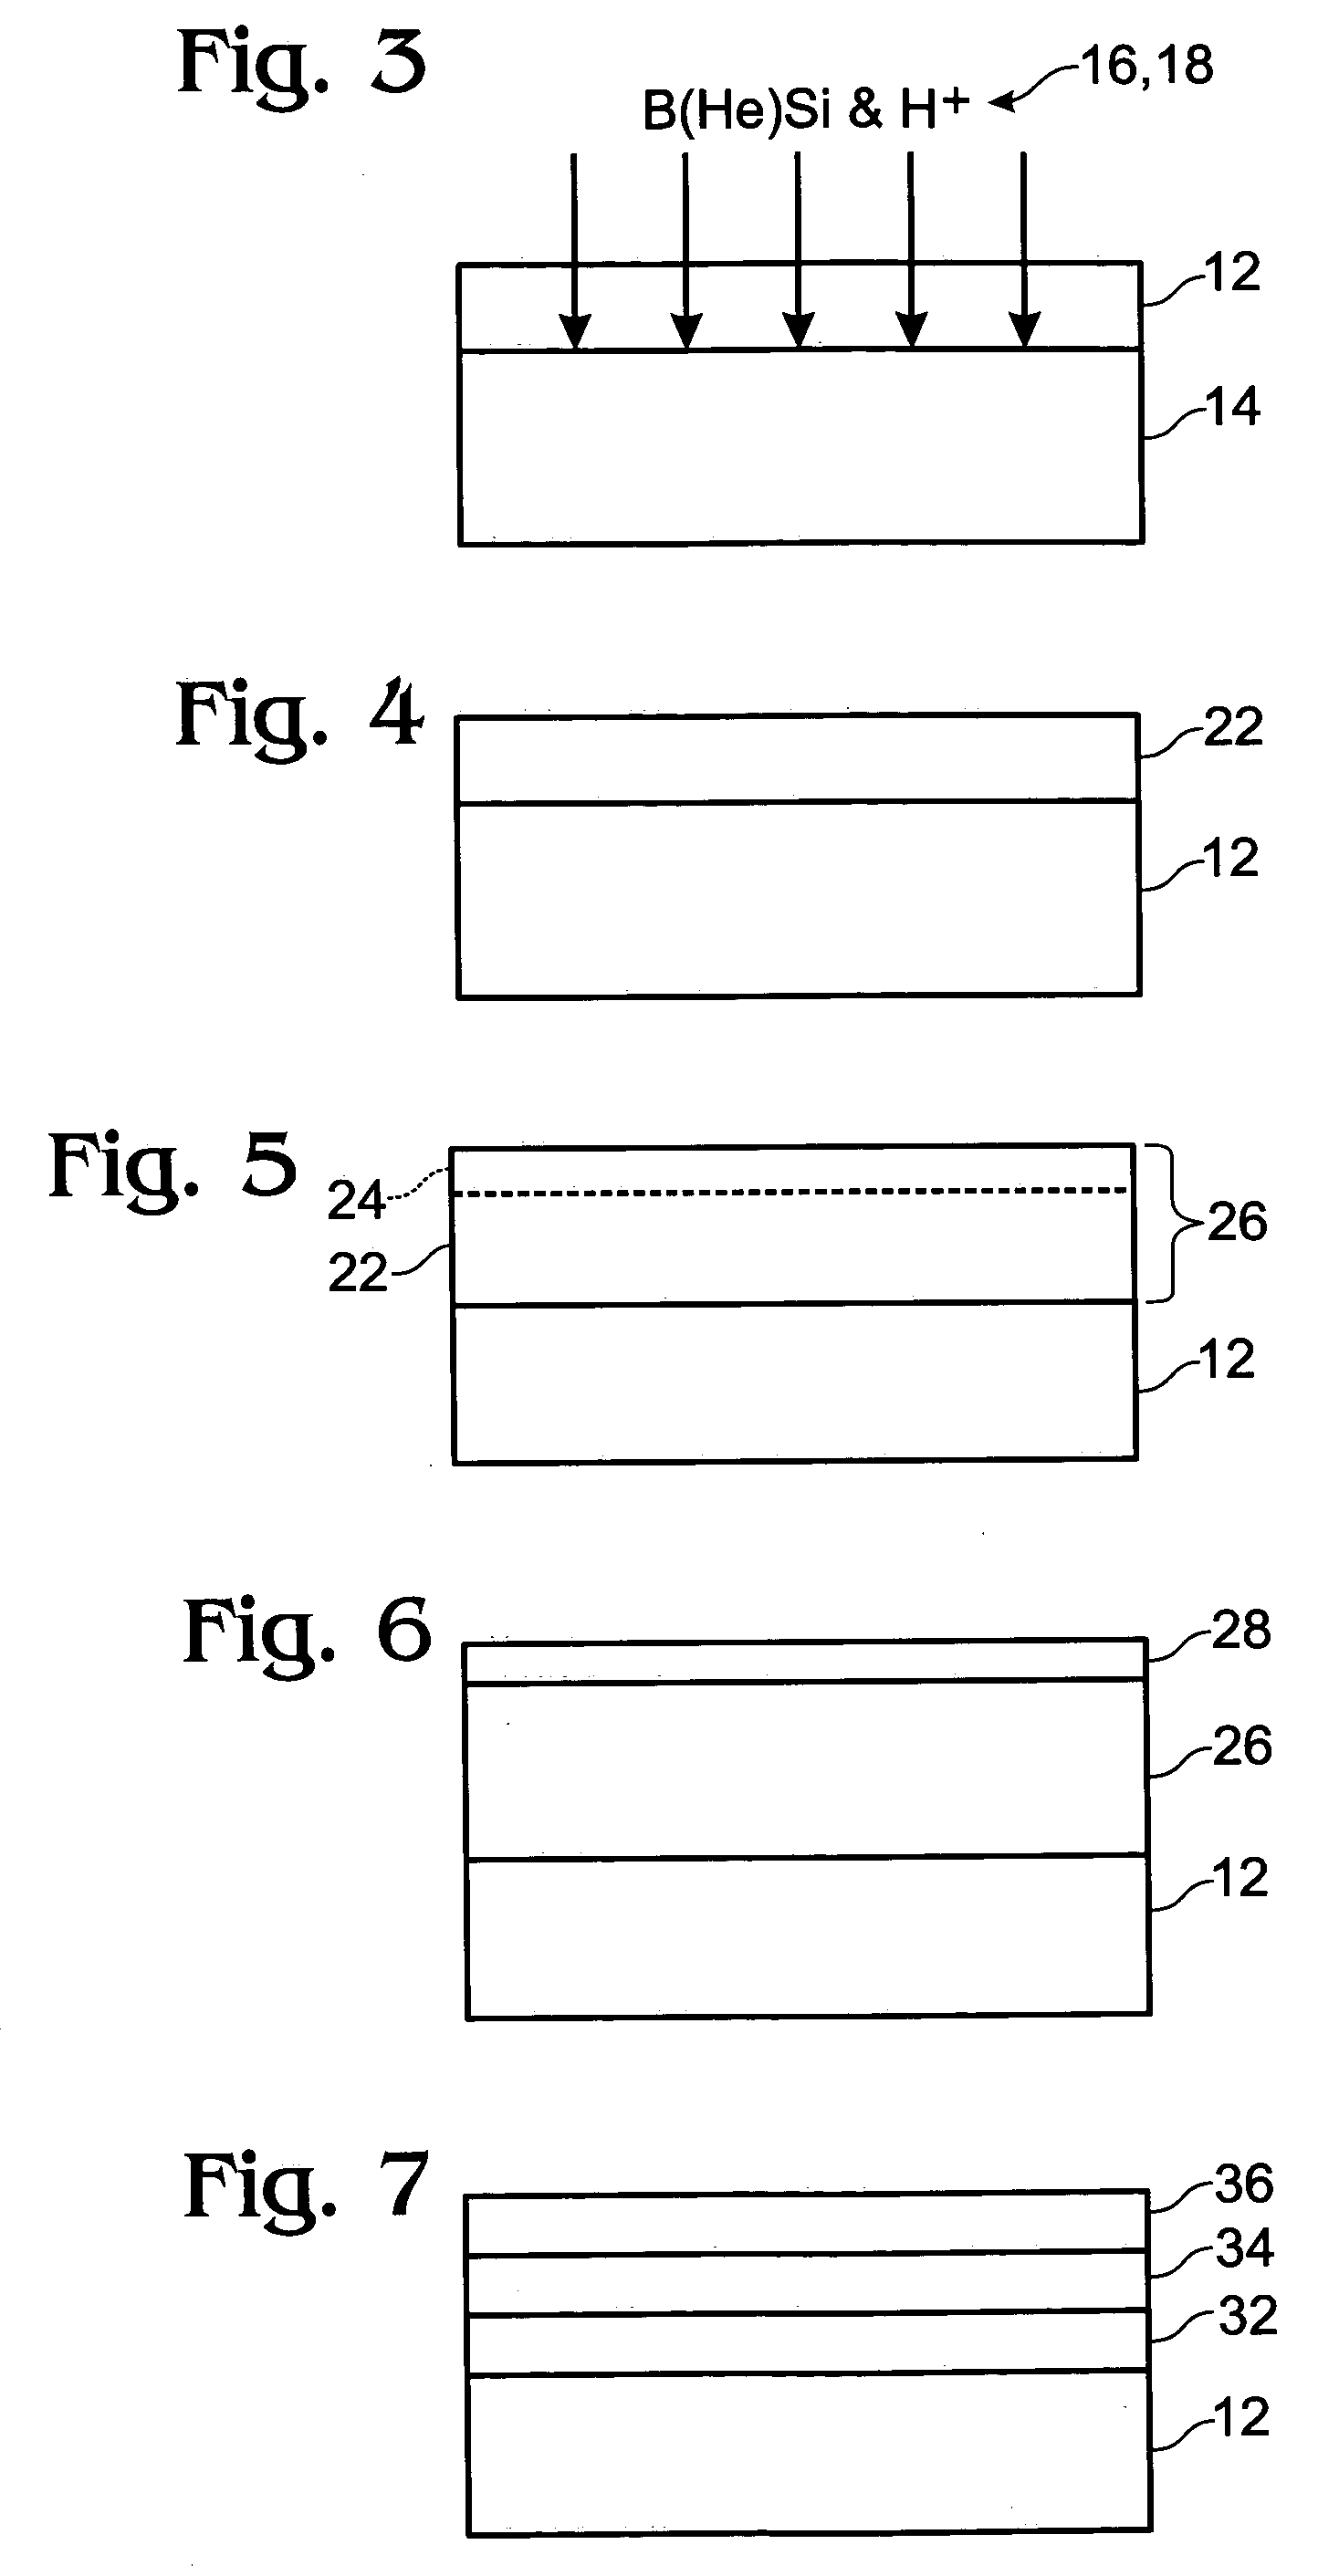 Method to form relaxed SiGe layer with high Ge content using co-implantation of silicon with boron or helium and hydrogen